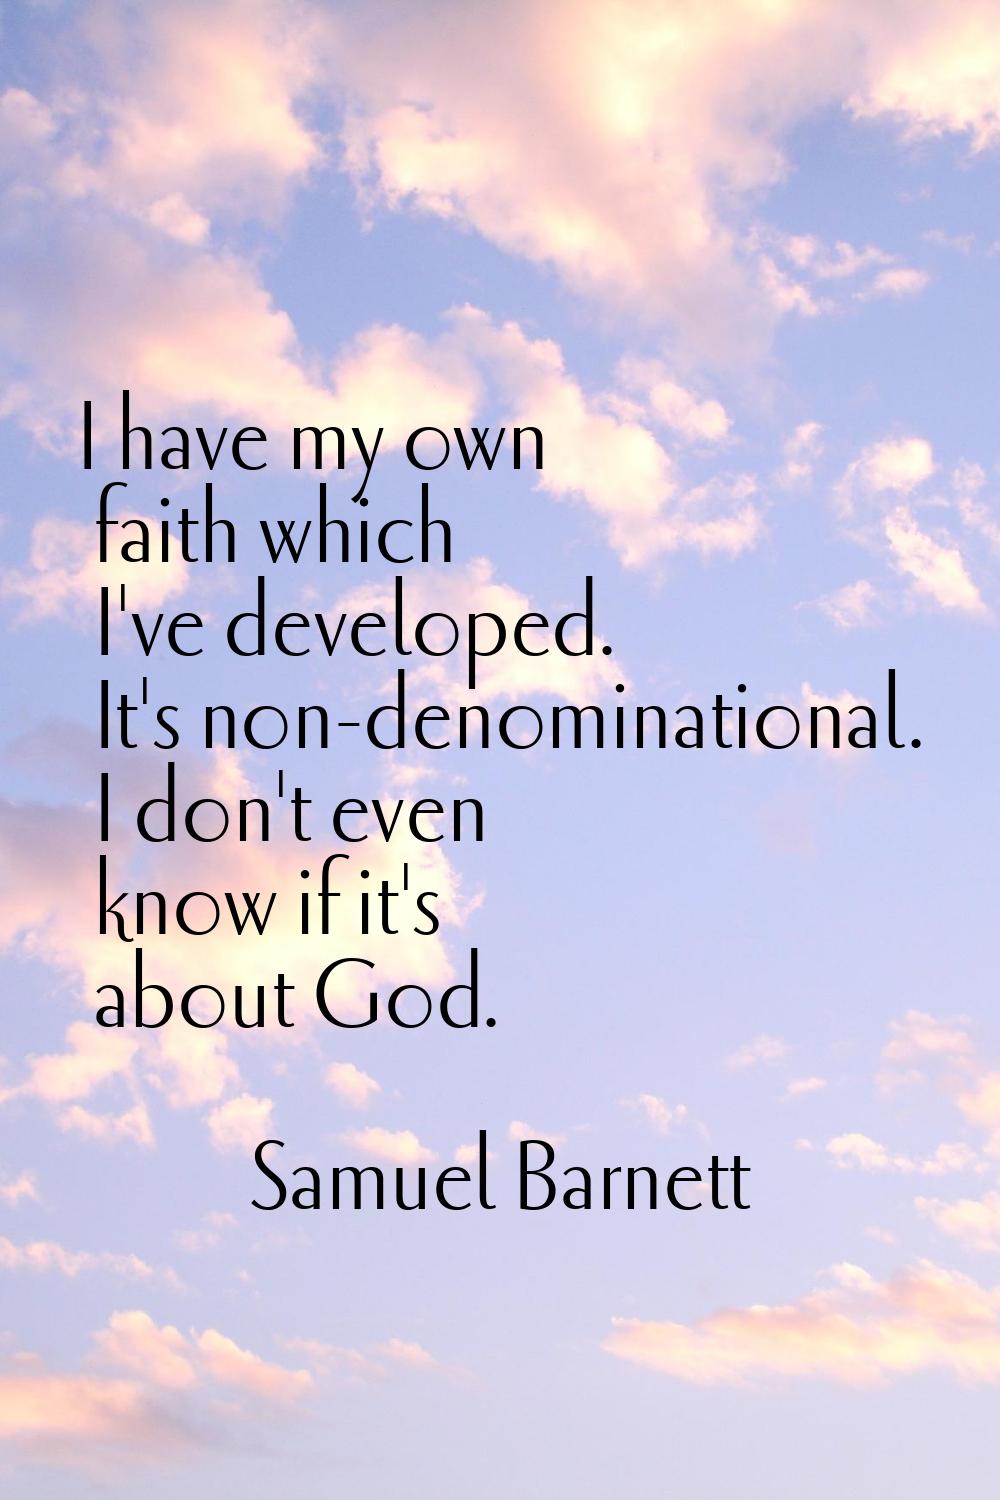 I have my own faith which I've developed. It's non-denominational. I don't even know if it's about 